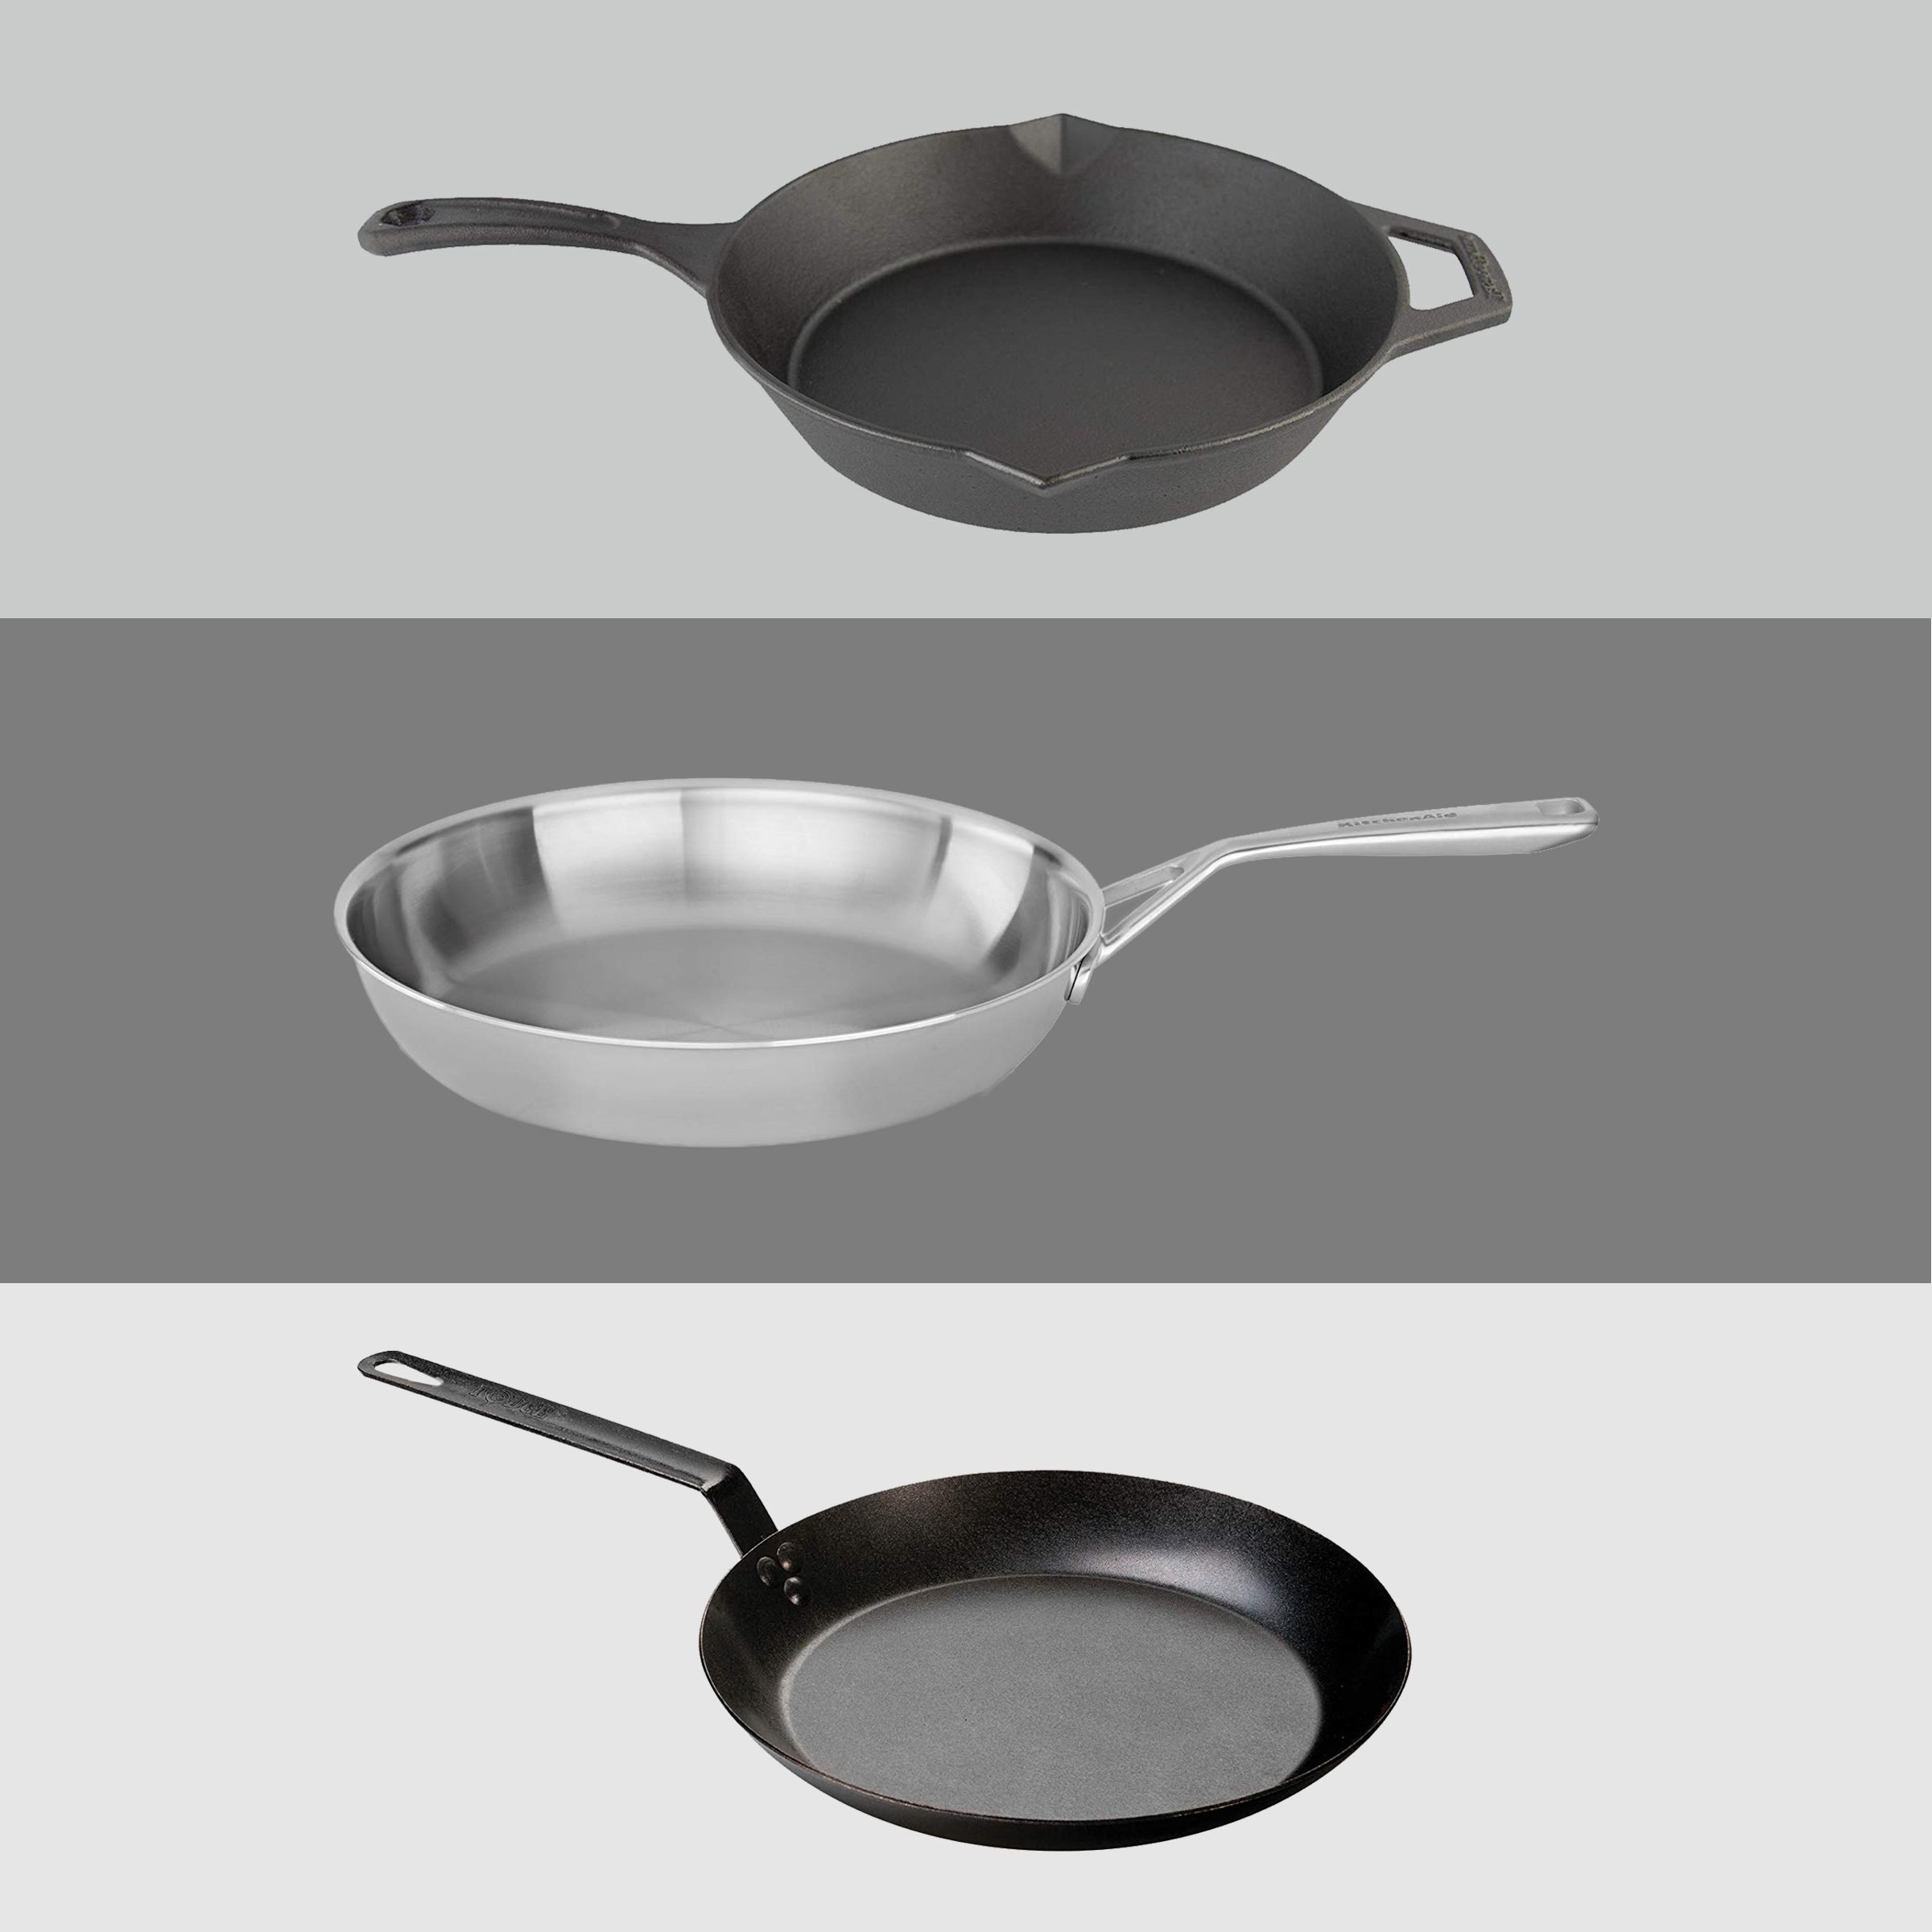 Differences between skillet and frying pan